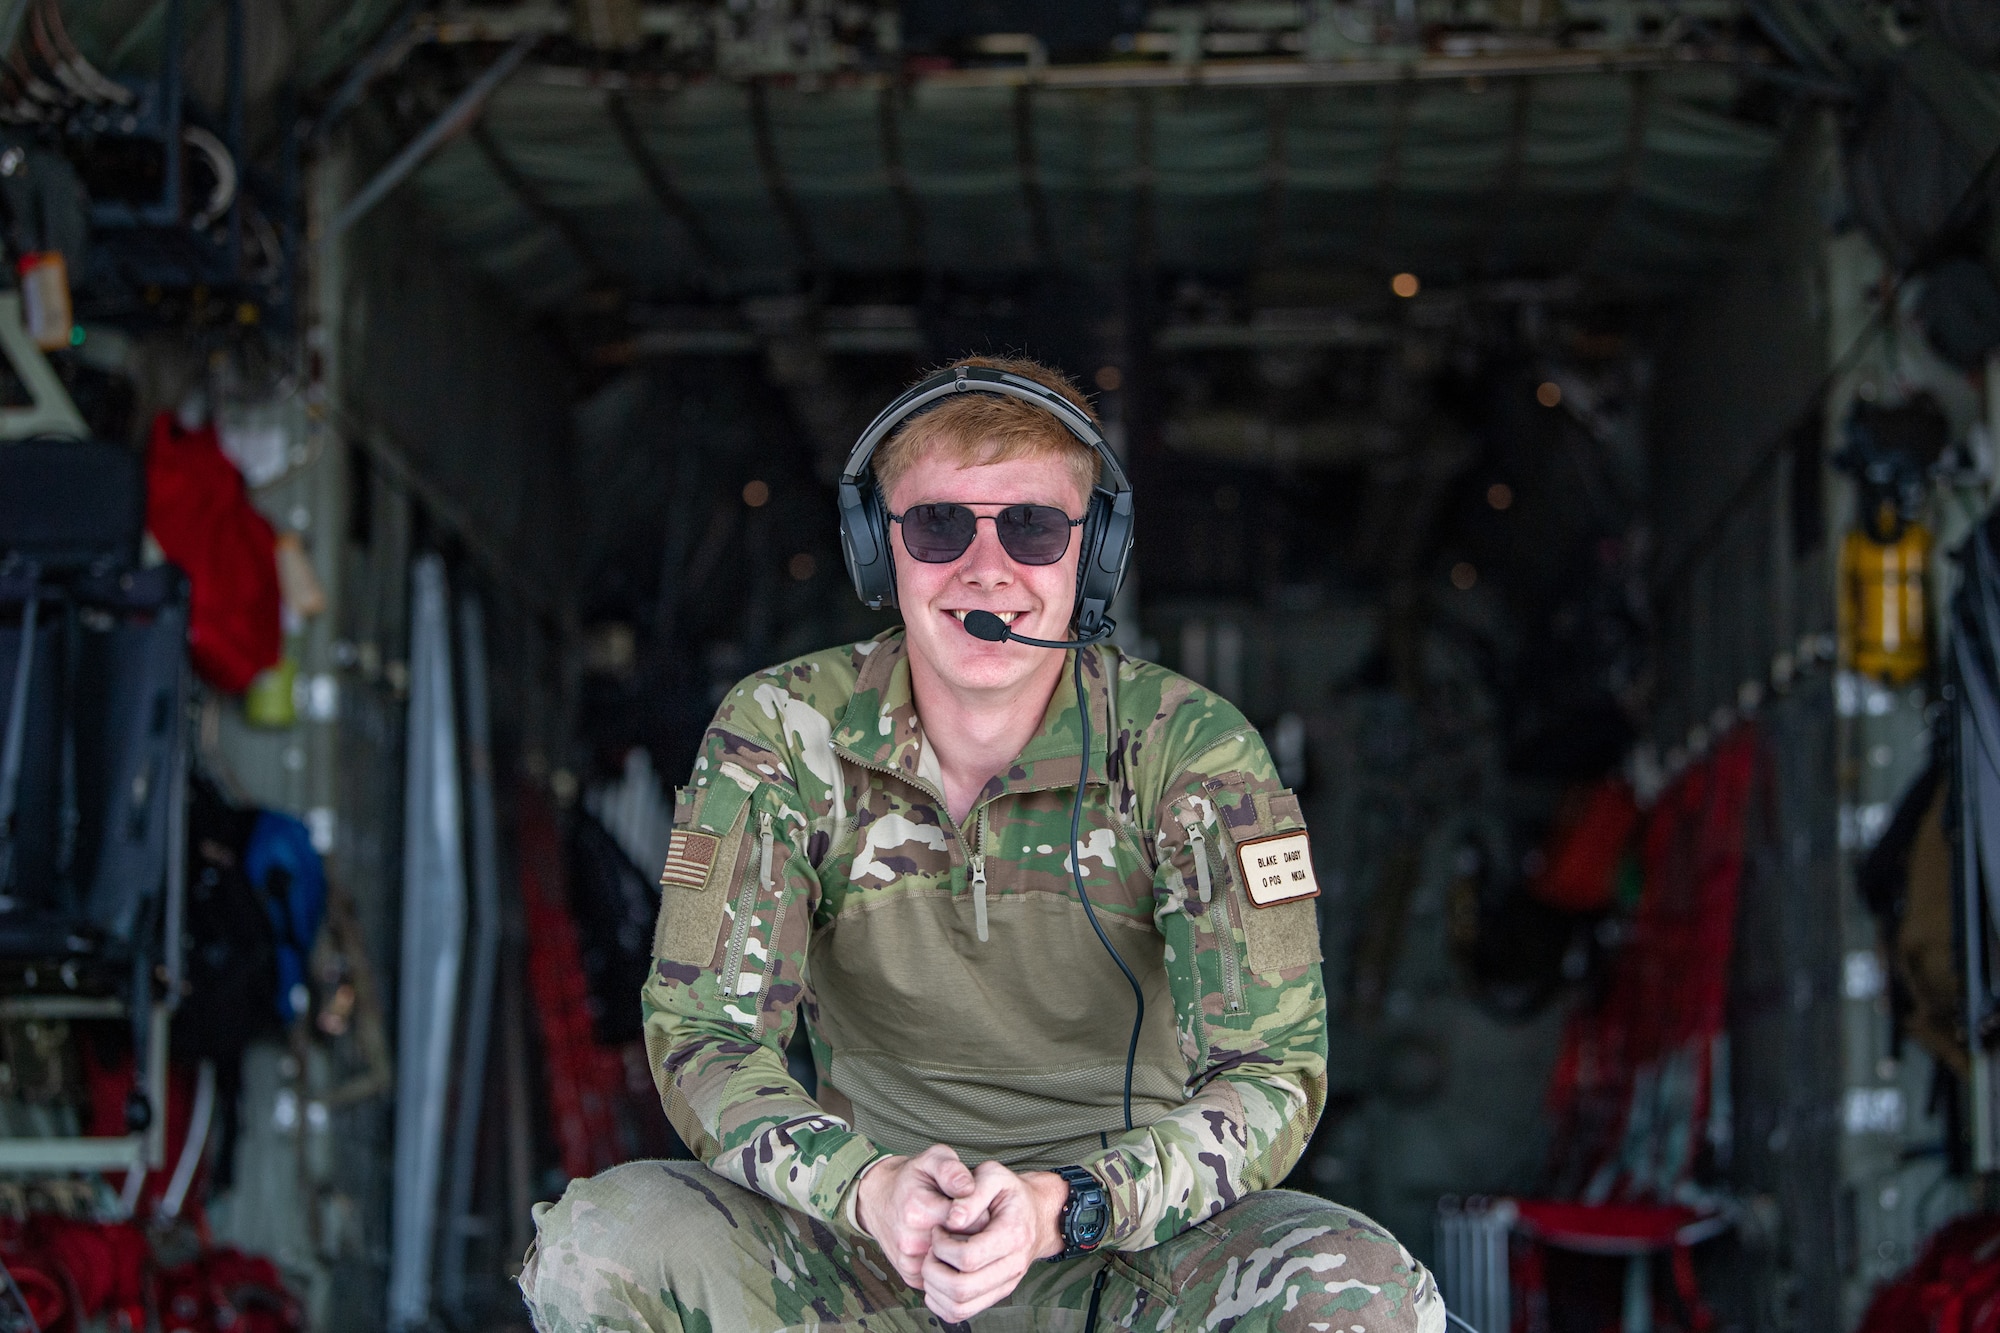 U.S. Air Force Airman 1st Class Blake Daggy, 71st Rescue Squadron loadmaster, poses for a photo during Exercise Ready Tiger 24-1 at Savannah Air National Guard Base, Georgia, April 10, 2024. During Ready Tiger 24-1, the 23rd Wing will be evaluated on the integration of Air Force Force Generation principles such as Agile Combat Employment, integrated combat turns, forward aerial refueling points, multi-capable Airmen, and combat search and rescue capabilities. (U.S. Air Force photo by Senior Airman Courtney Sebastianelli)